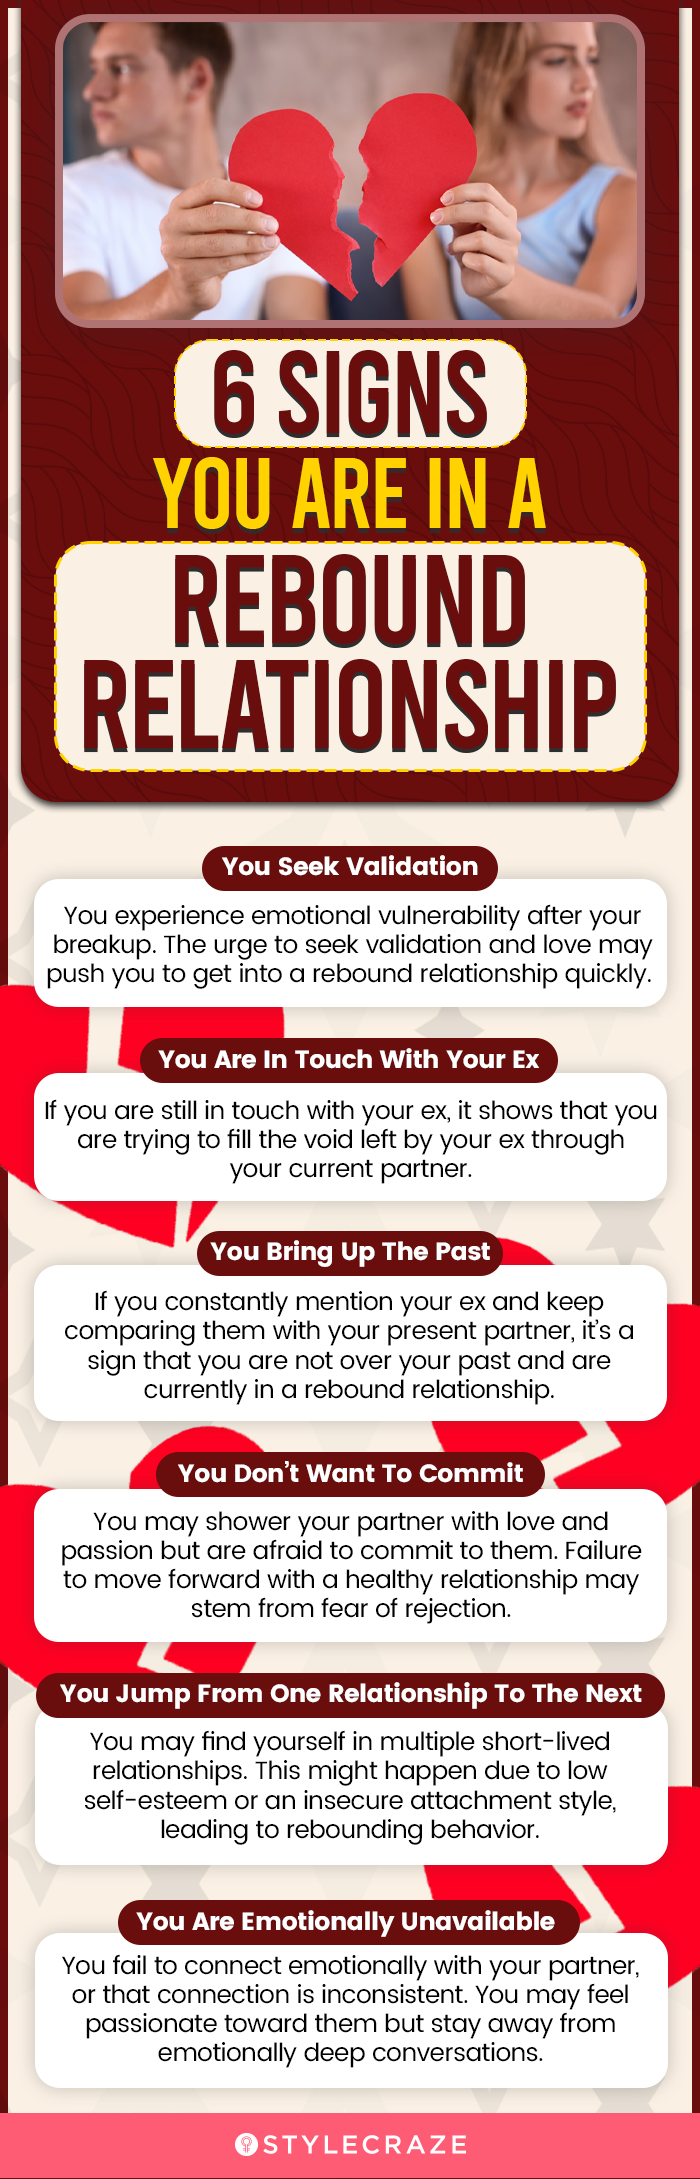 6 signs you are in a rebound relationship (infographic)